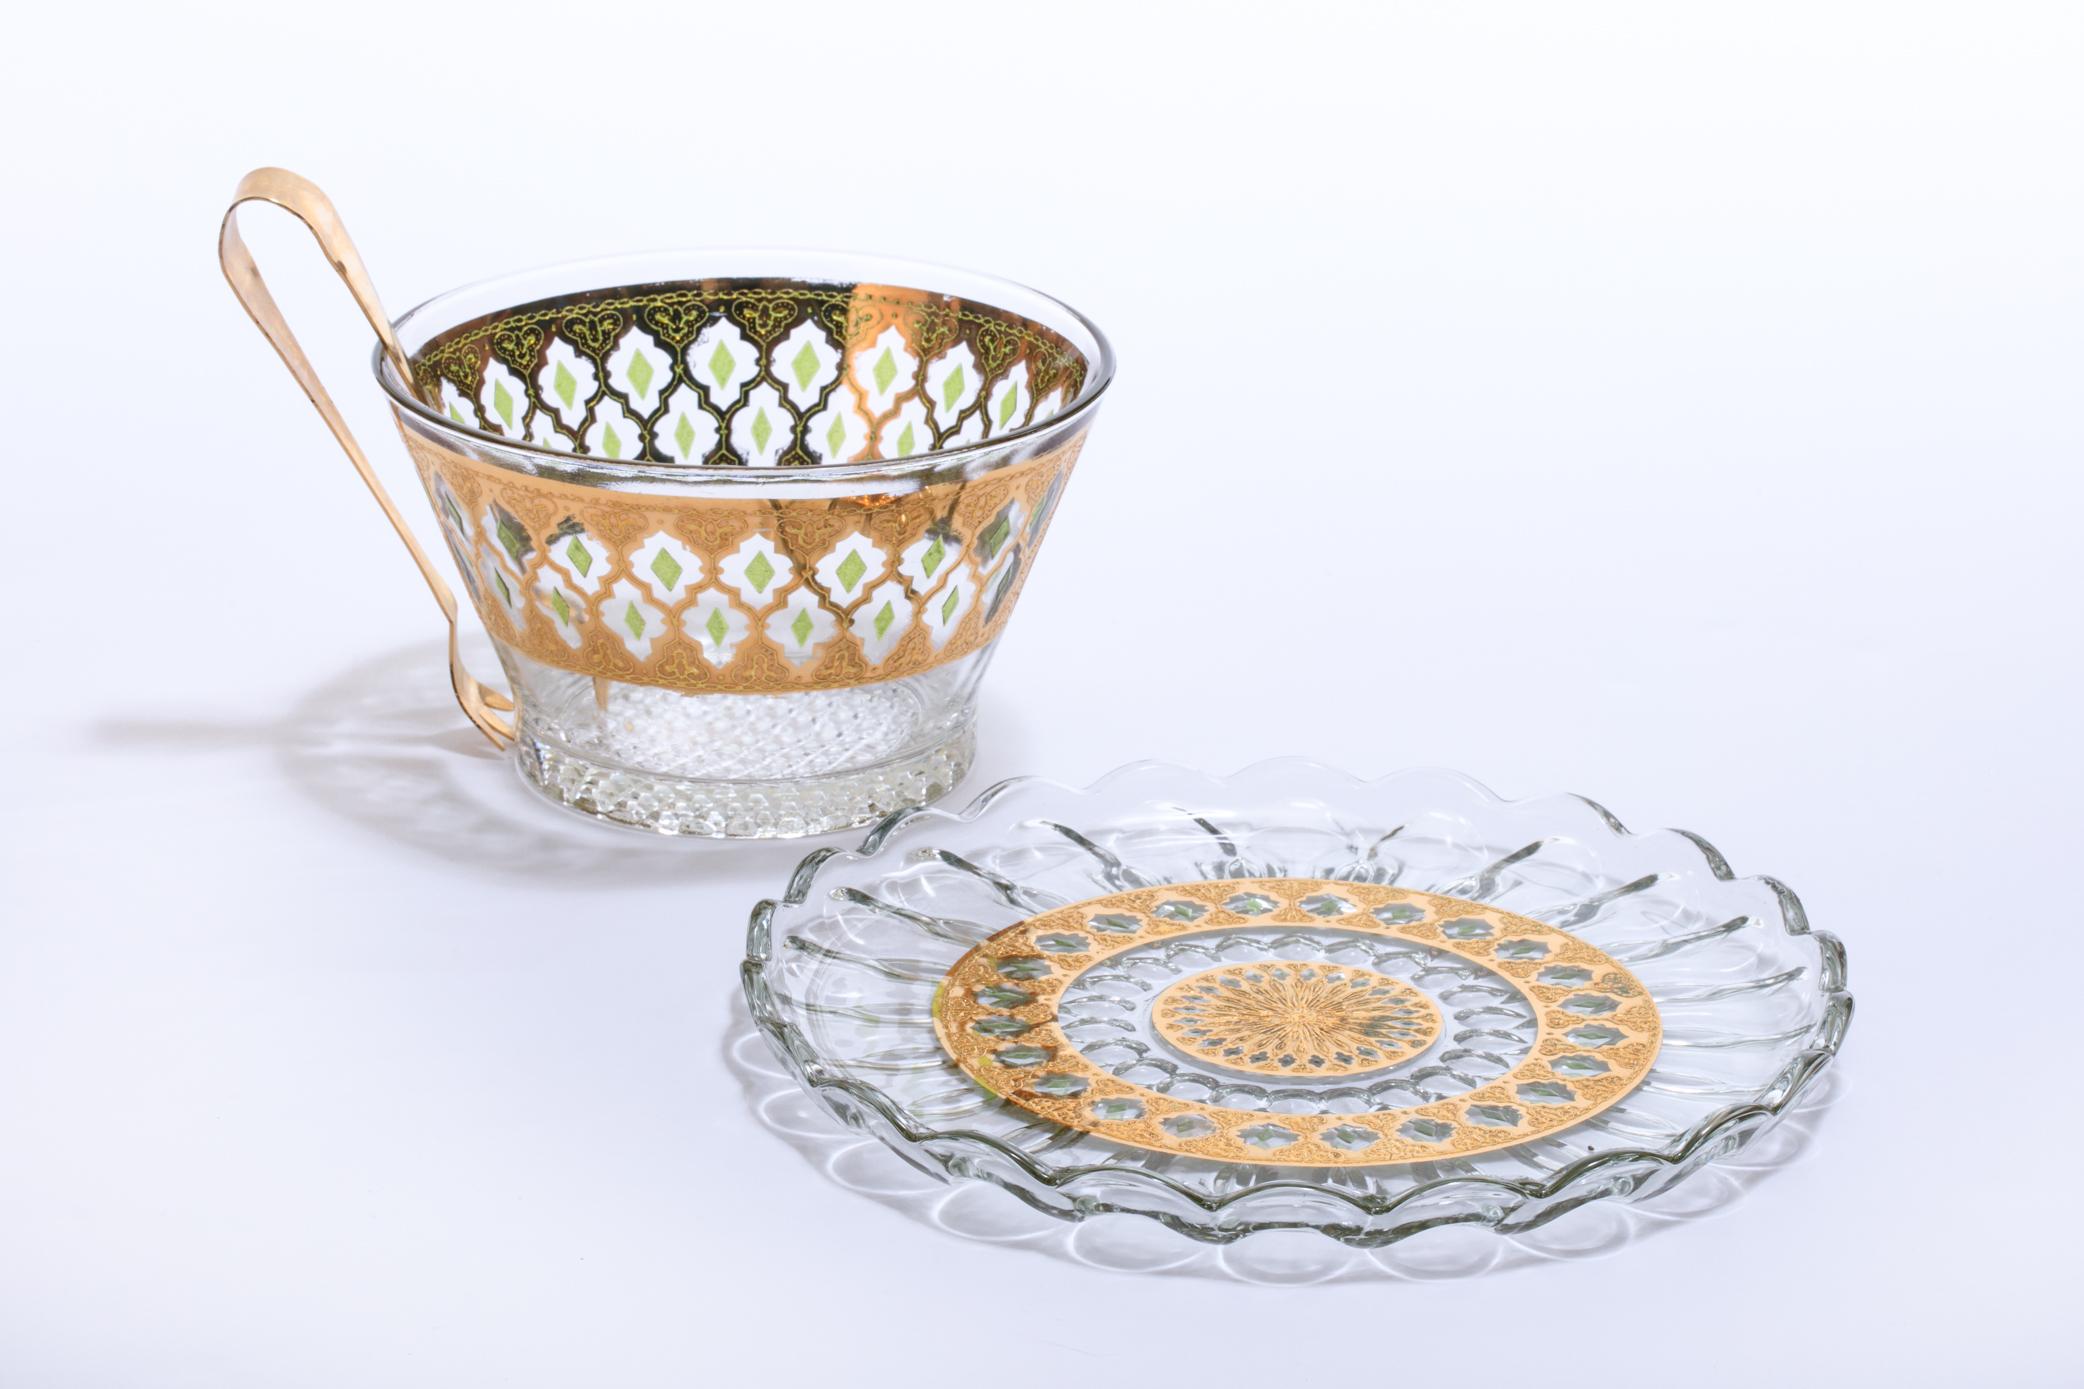 Beautiful Moroccan themed ice bowl with original matching tongs. The ice bowl shows no wear and is in great condition. This style was showcased in the feature film 